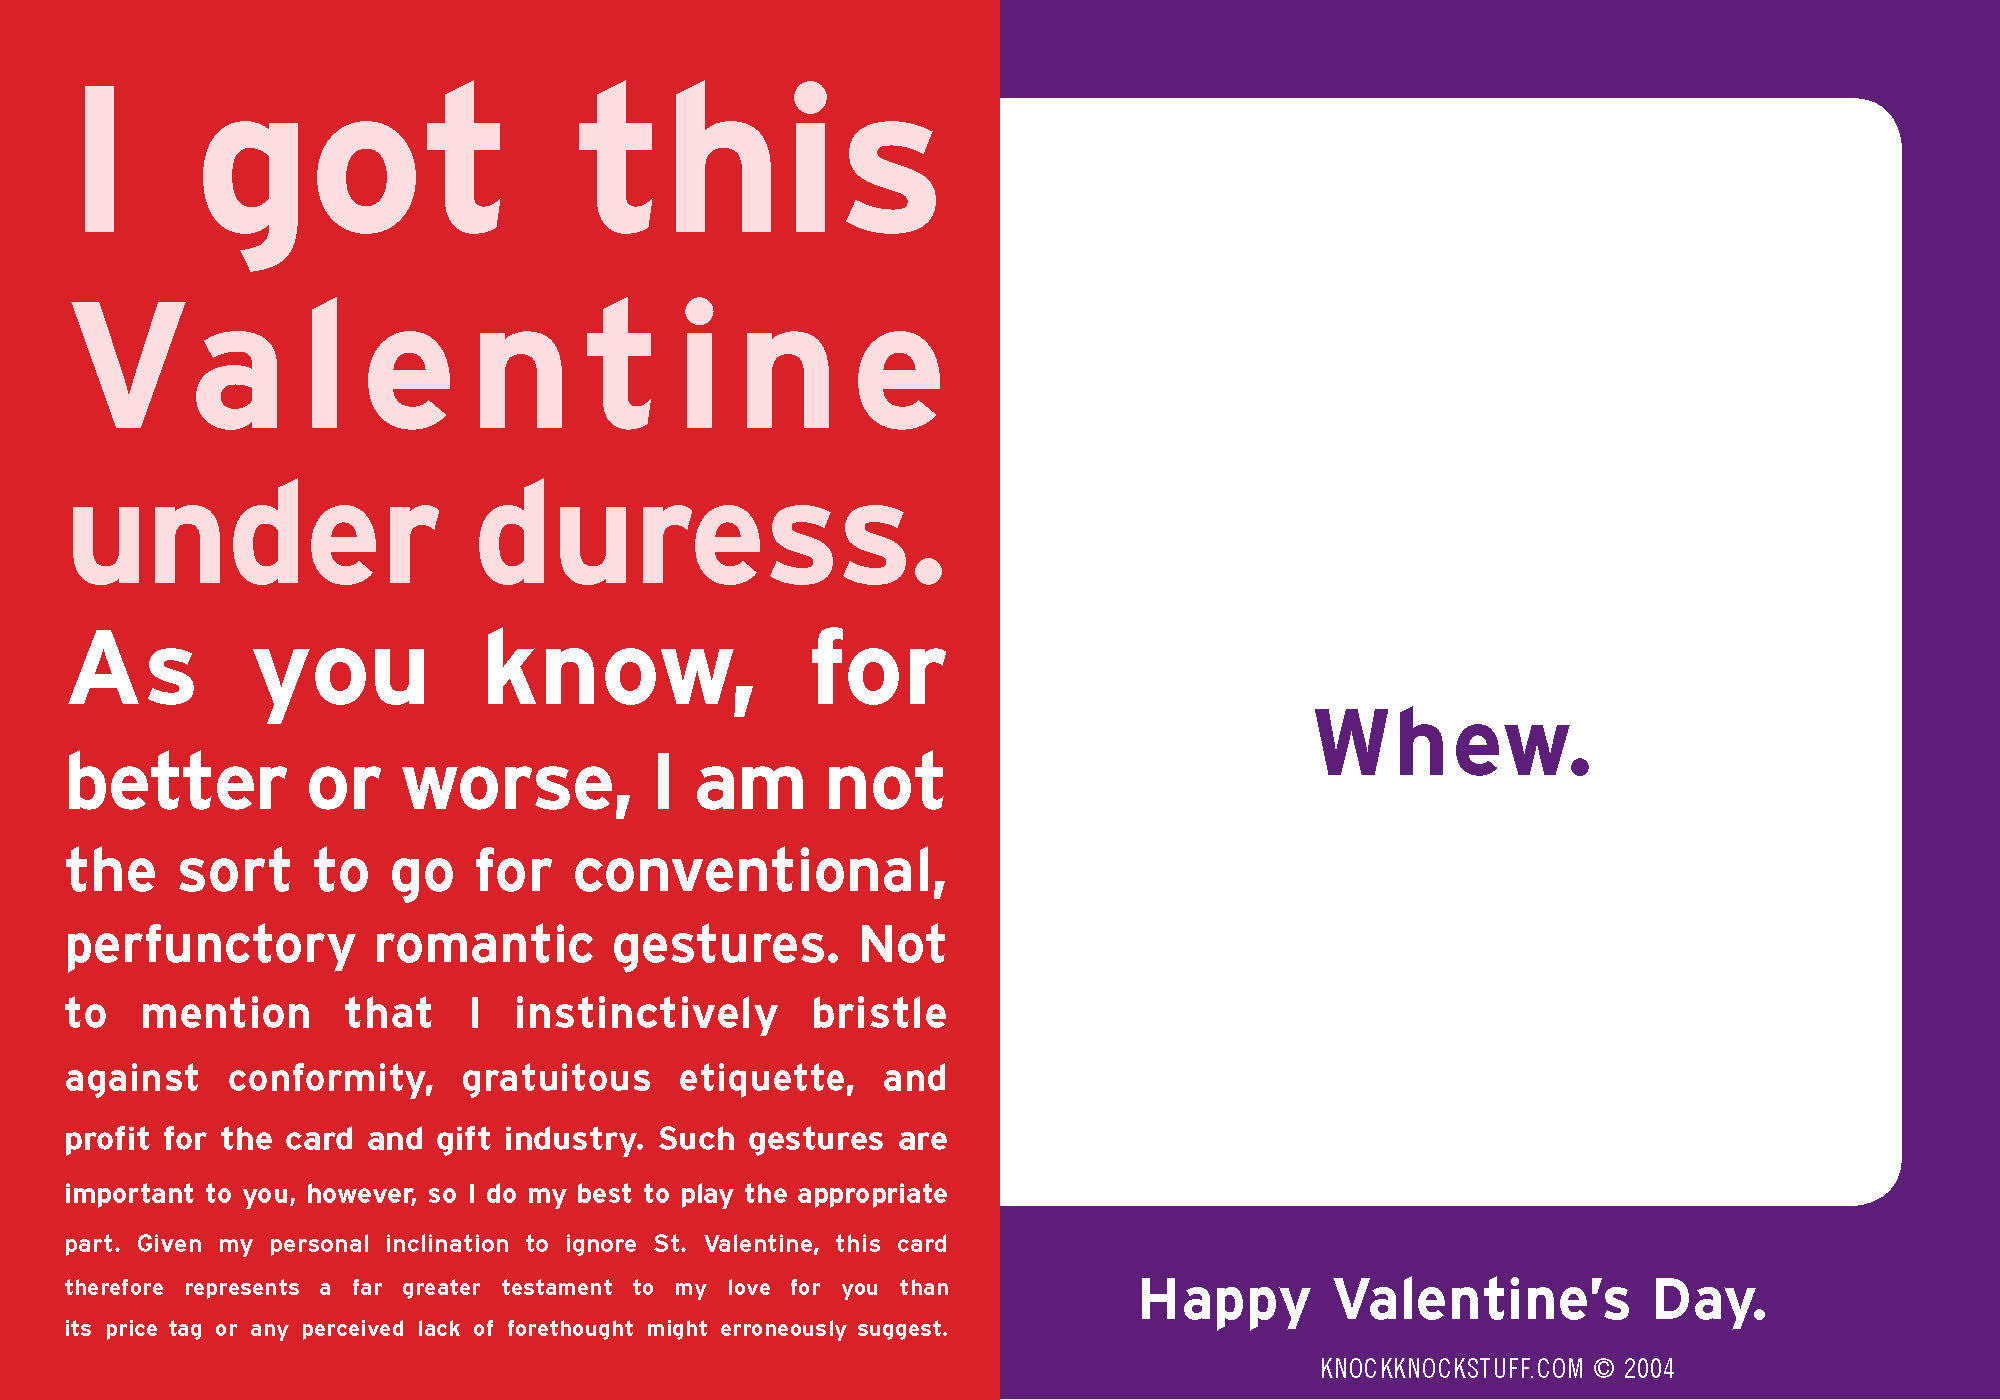 NOSTALGIA 2014: I thought this card would revolutionize the dominant discourse on Valentine's Day and its triangulated yet paradigmatic biases of gender, socioeconomic status, and bullshit. I did no follow-up study to determine whether this ultimately occurred, however.